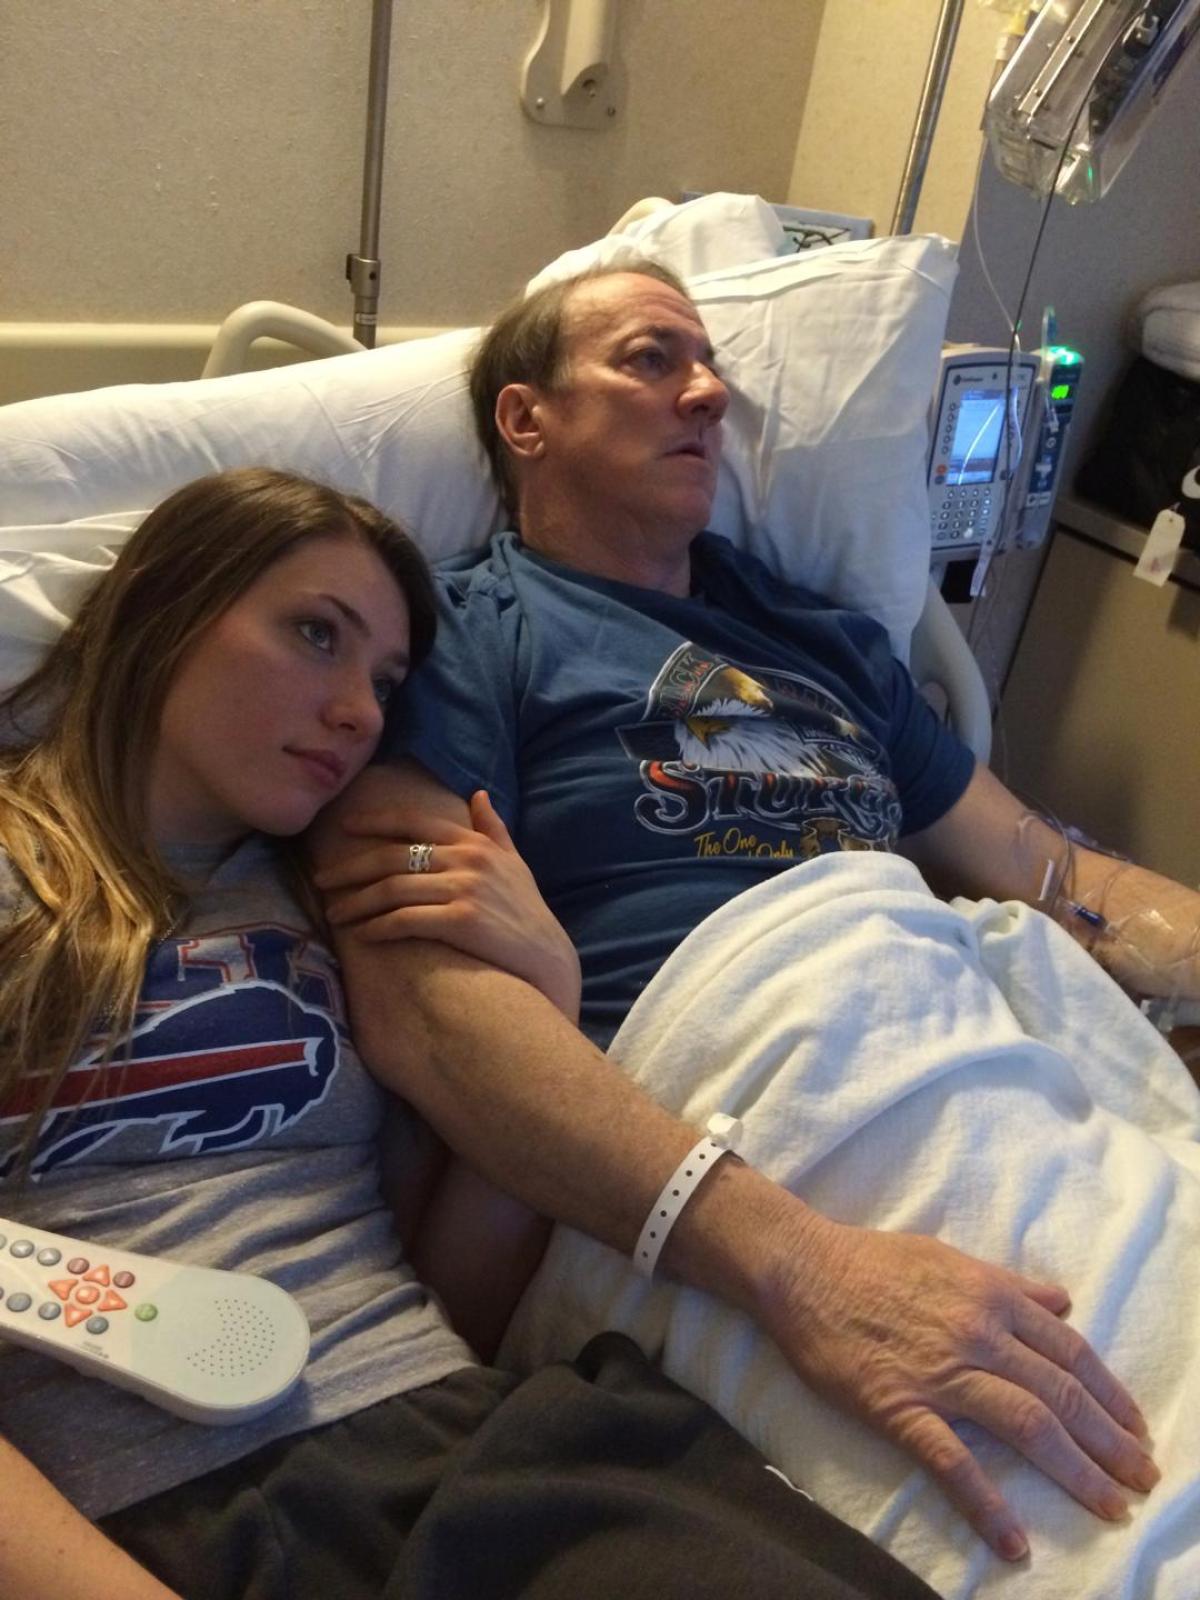 Jim Kelly’s cancer is treatable but inoperable with surgery